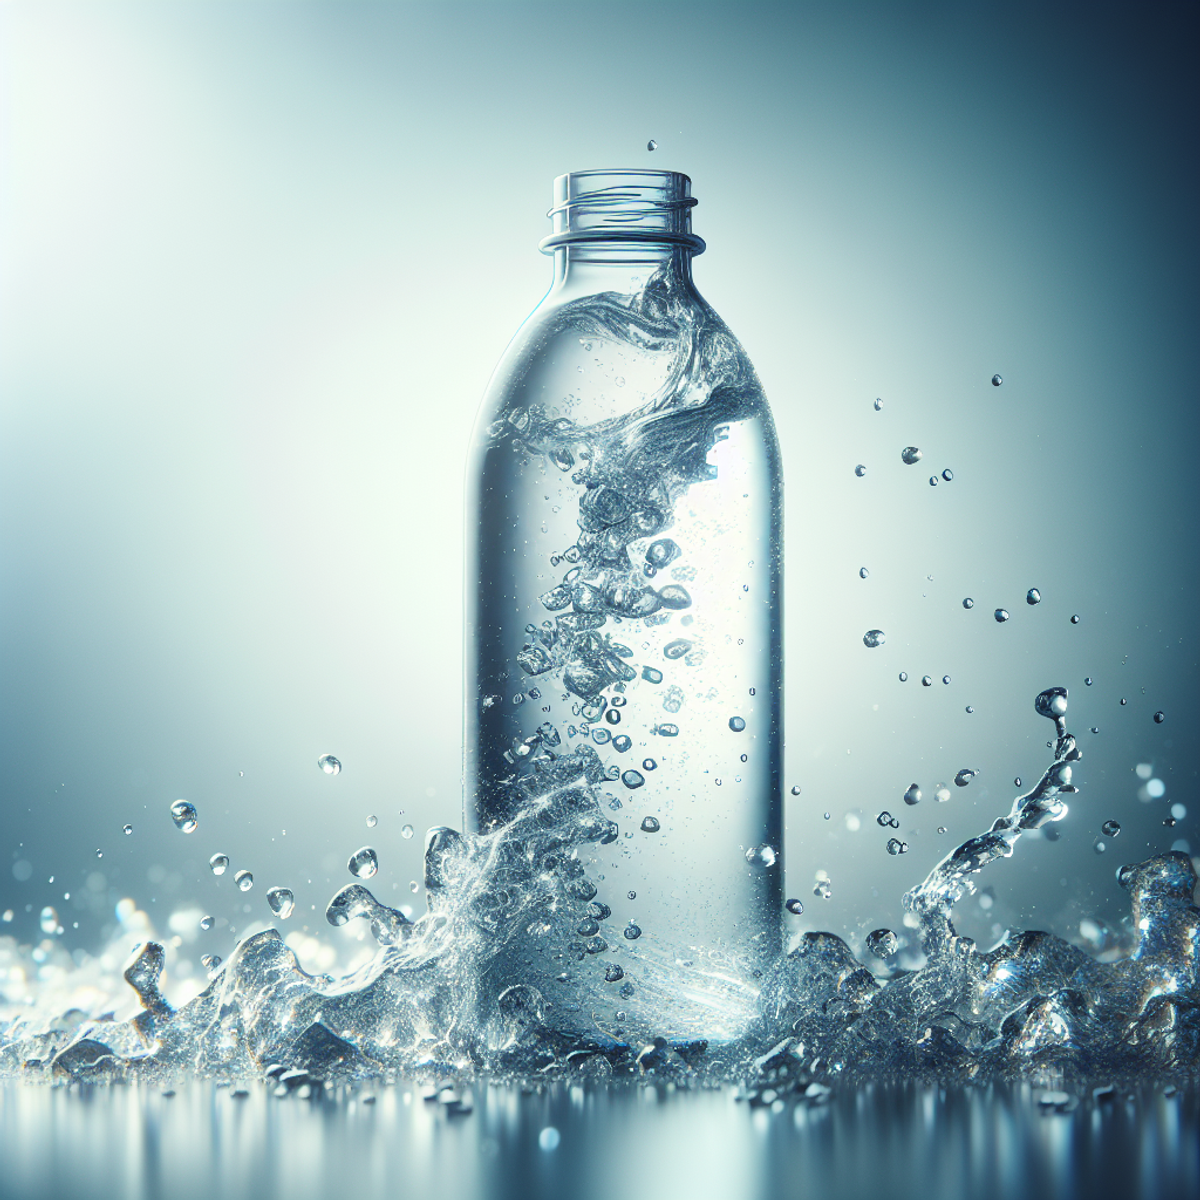 A close-up image of a transparent glass water bottle filled with crystal-clear water, sparkling under soft natural light.